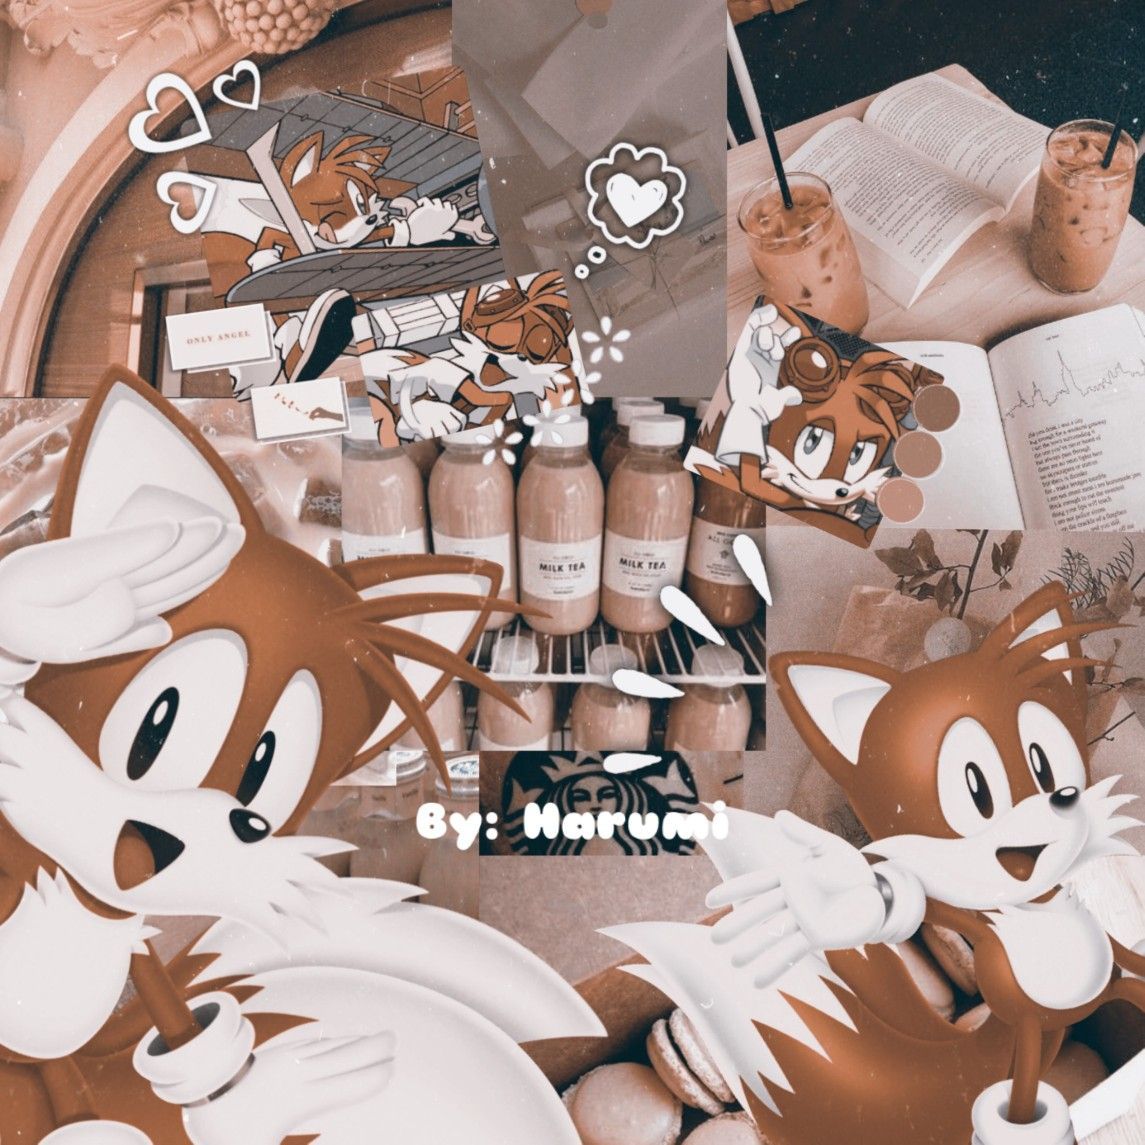 Tails Prower [Sonic the hedgehog] edit- aesthetic. Wallpaper pc, Sonic the hedgehog, Sonic